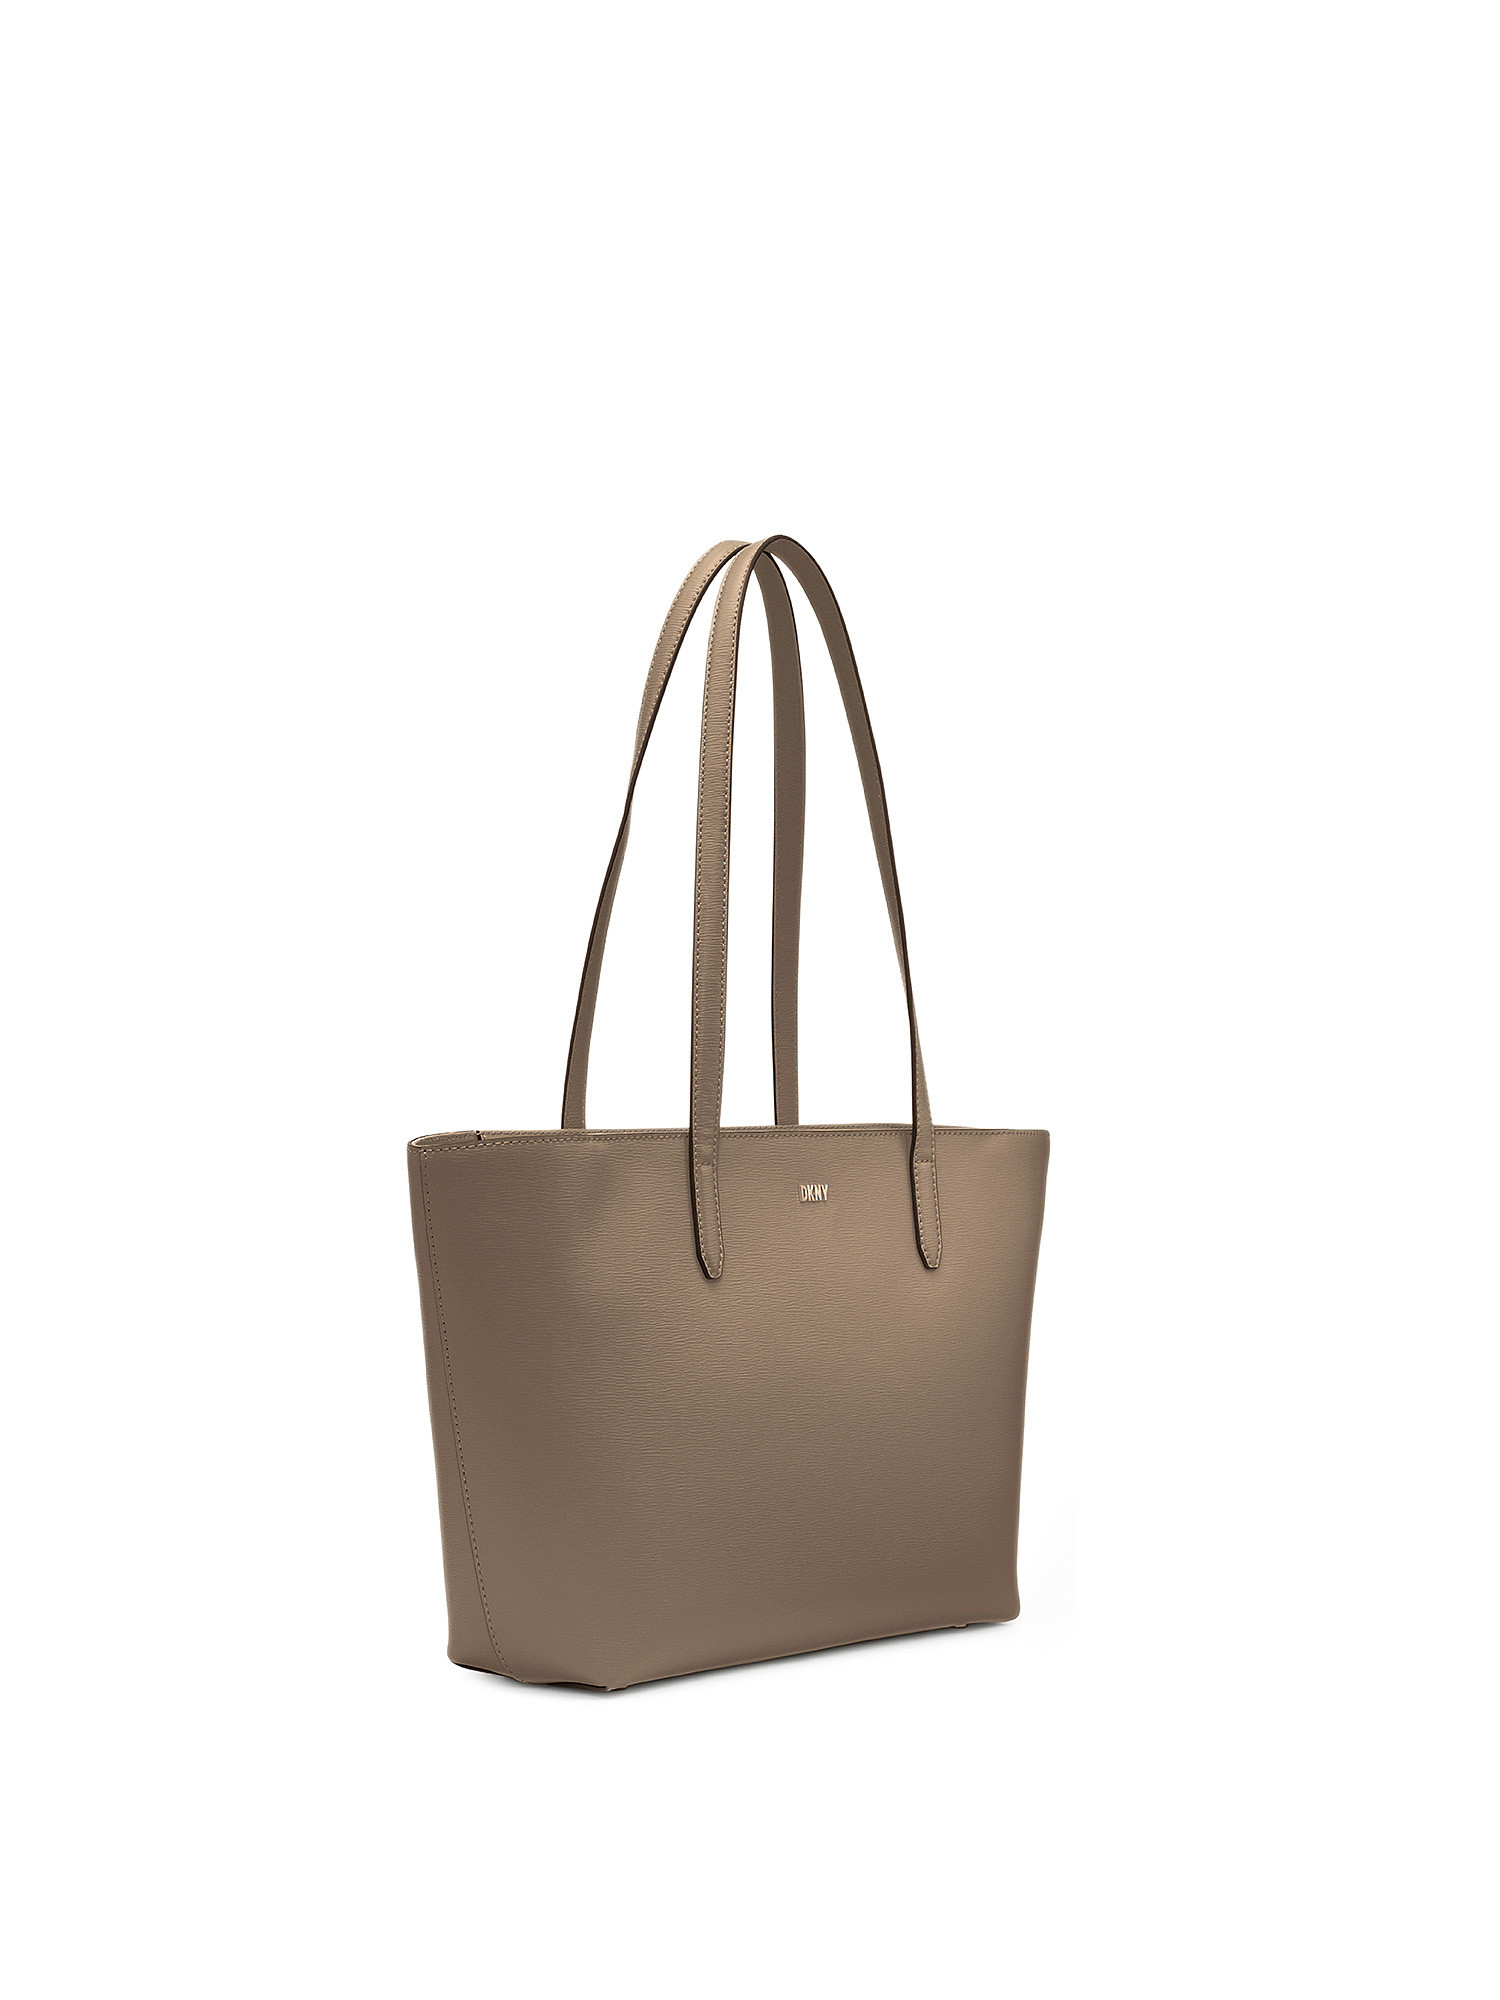 Dkny - Tote bag with removable accessory, Brown, large image number 1